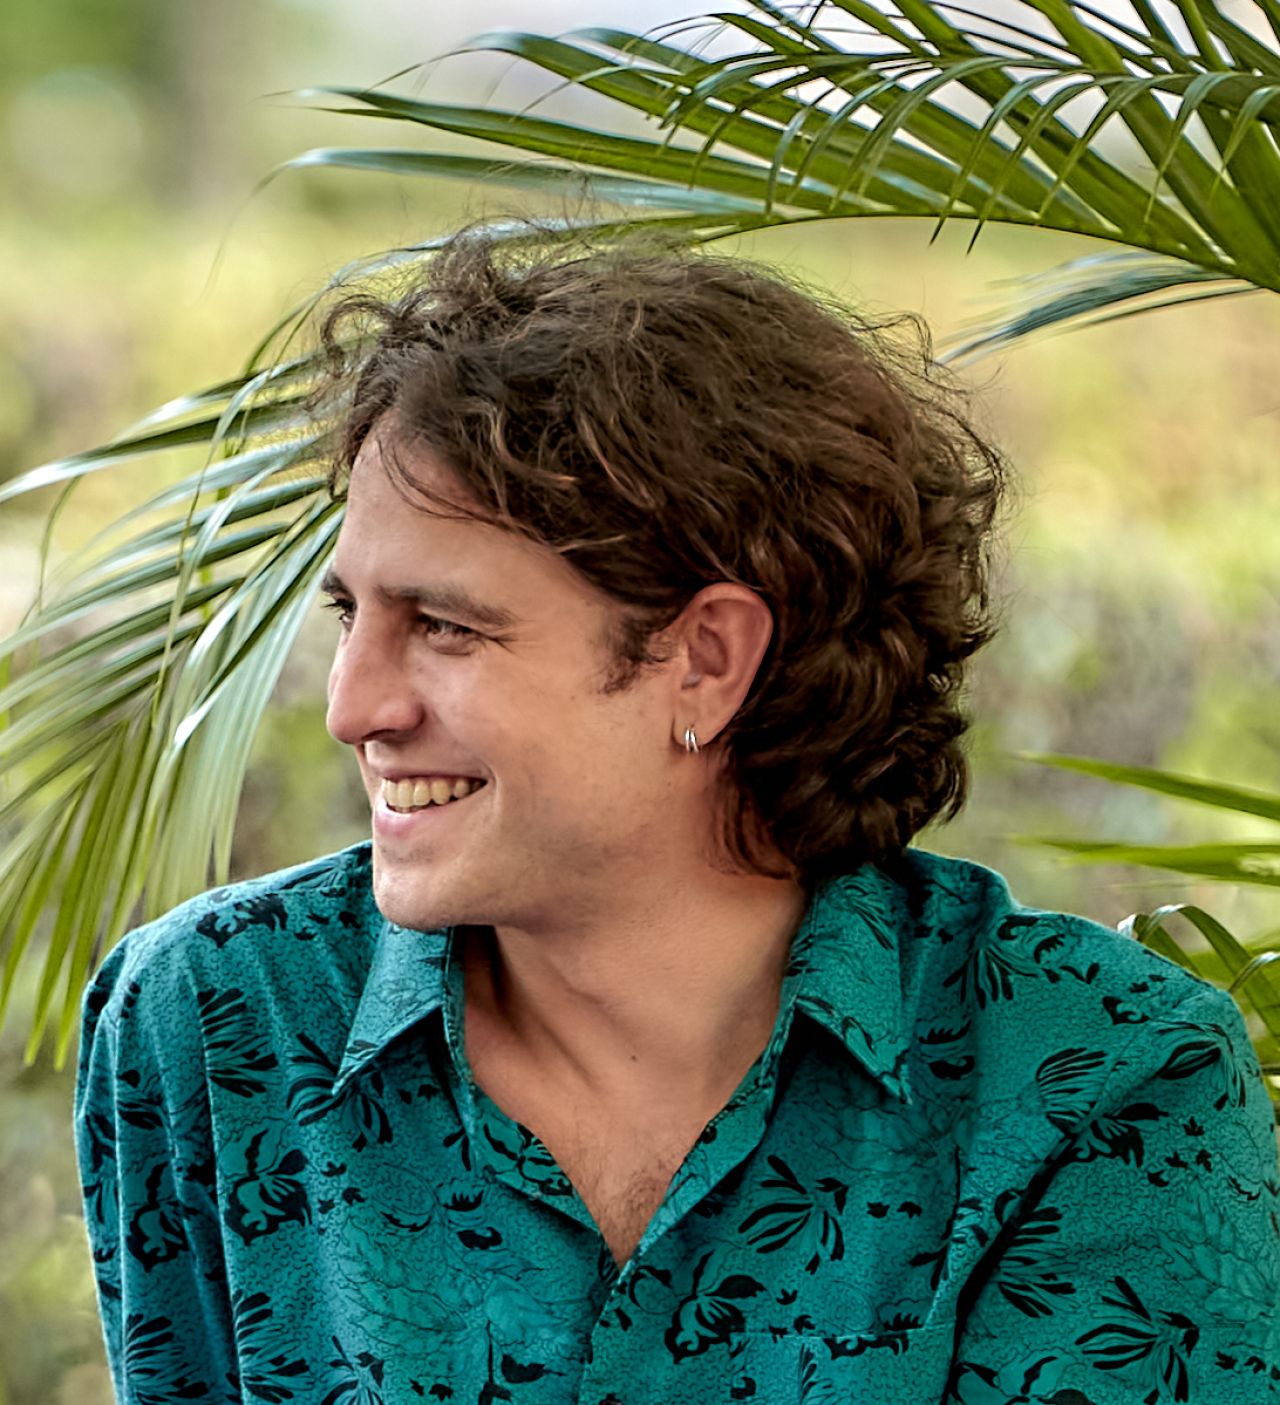 The photo shows a young brown-haired man wearing a green and flowered shirt.